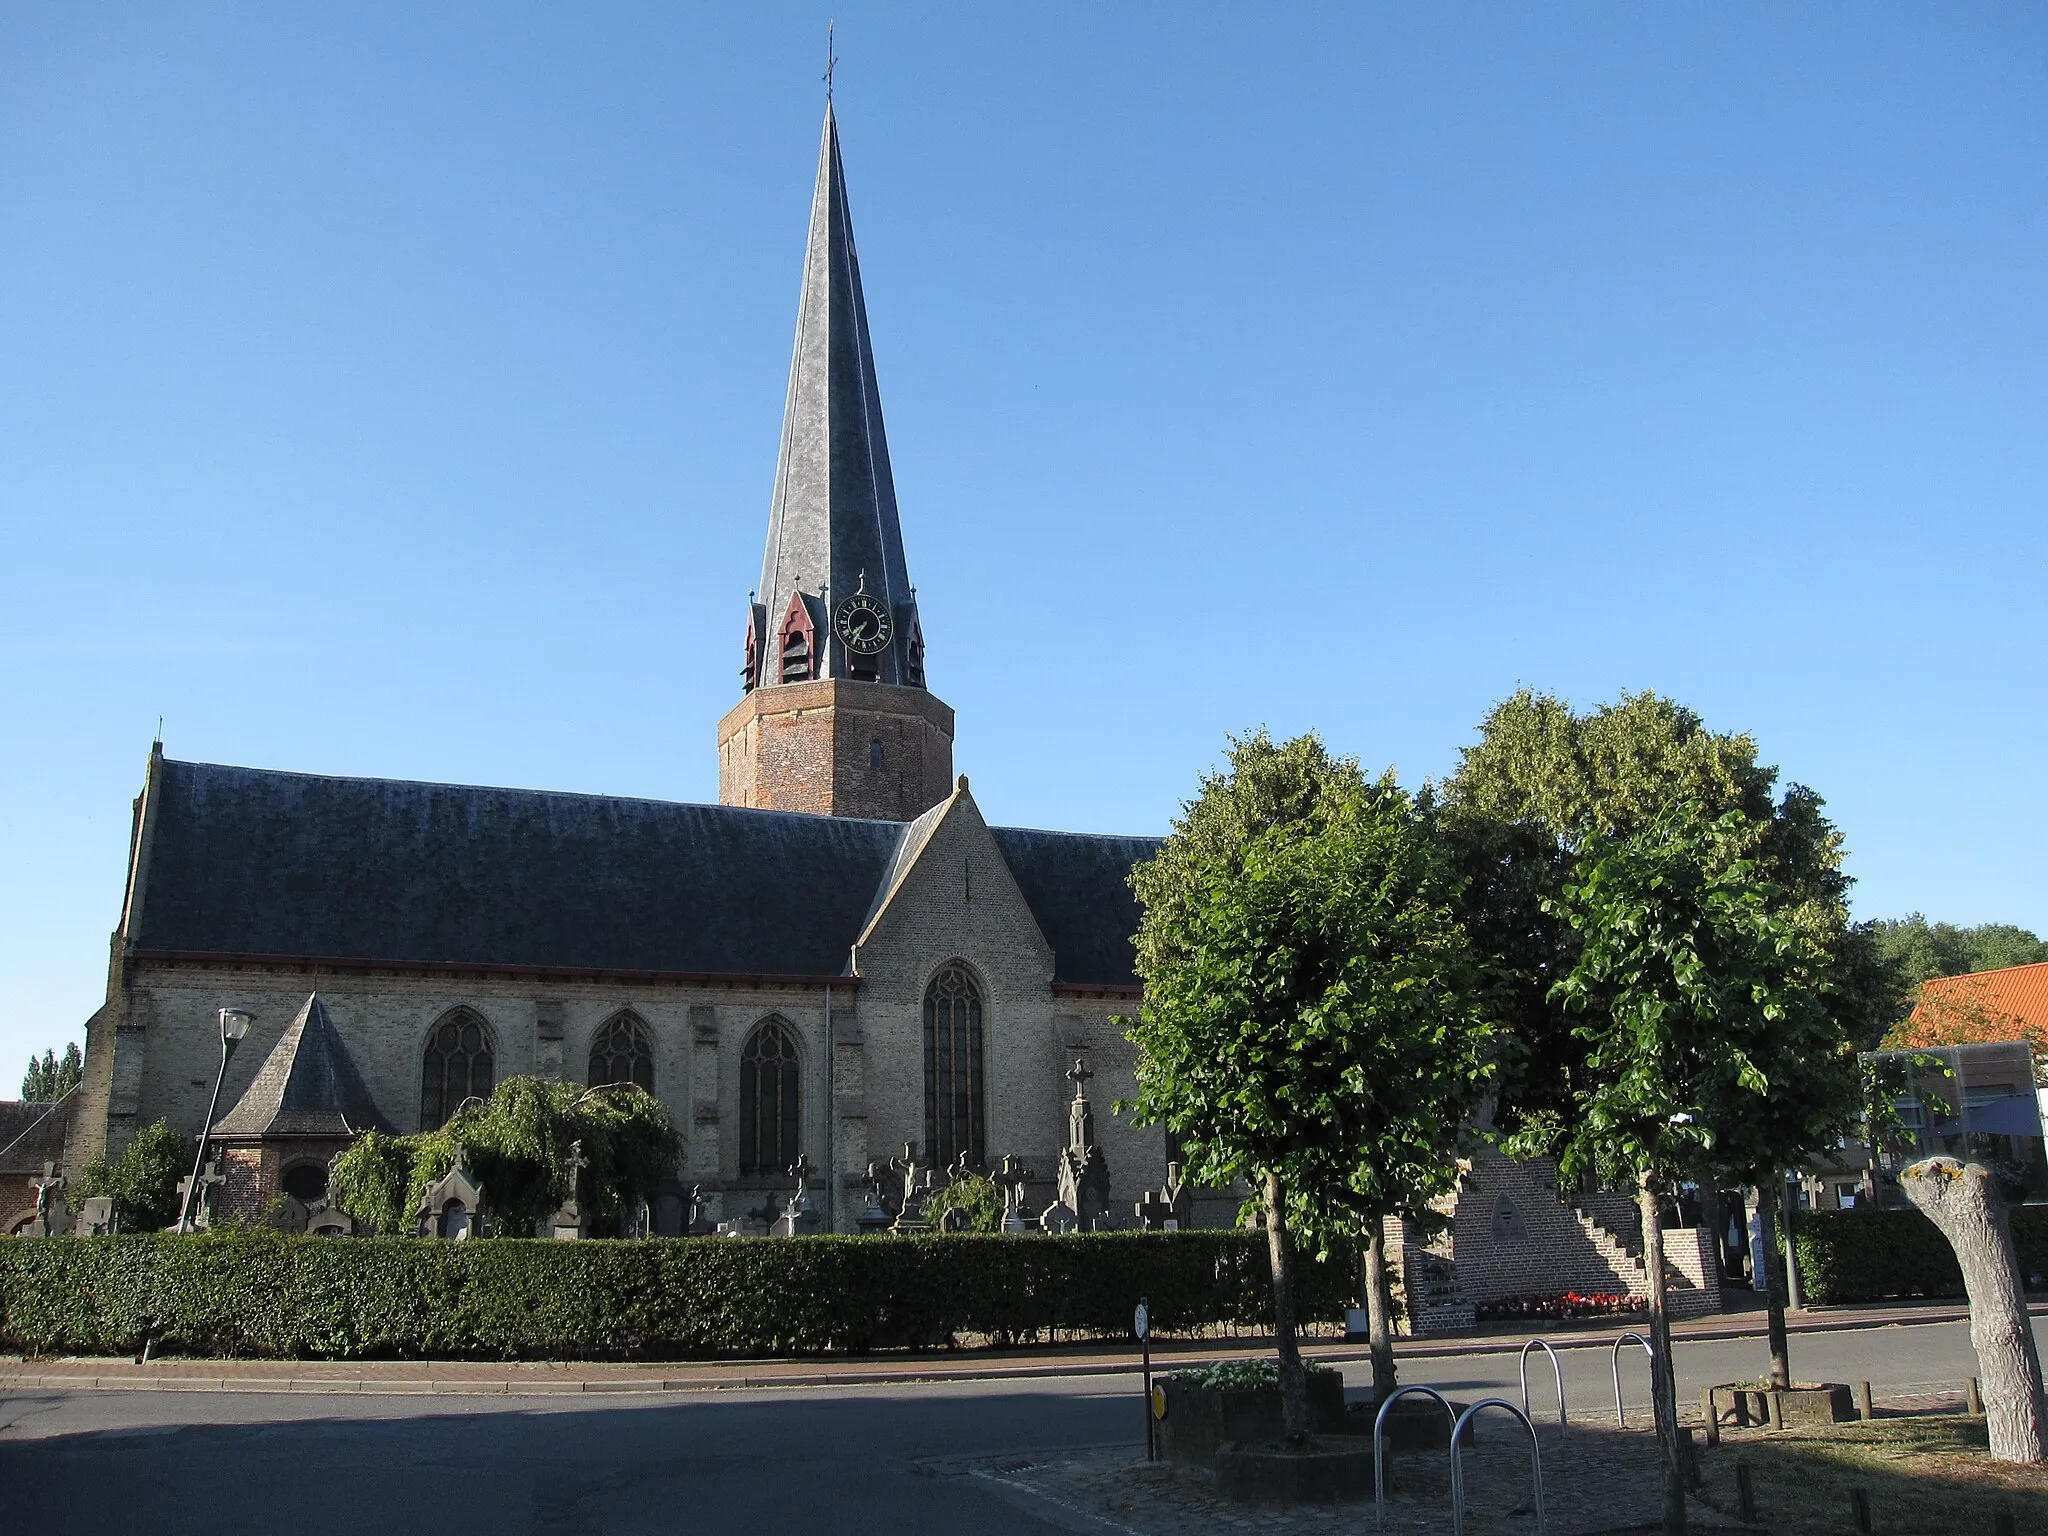 Photo showing: The Watou church and cemetery is located next to Watouplein, the square in the center of the village. During World War 1, called the Great War in Belgium, Watou and its surroundings was a quiet resting area behind the lines. No armed conflicts took place here, so the church only saw a few war funerals between April 1915 (the second battle of Ypres) and November 1918 (when the war ended).